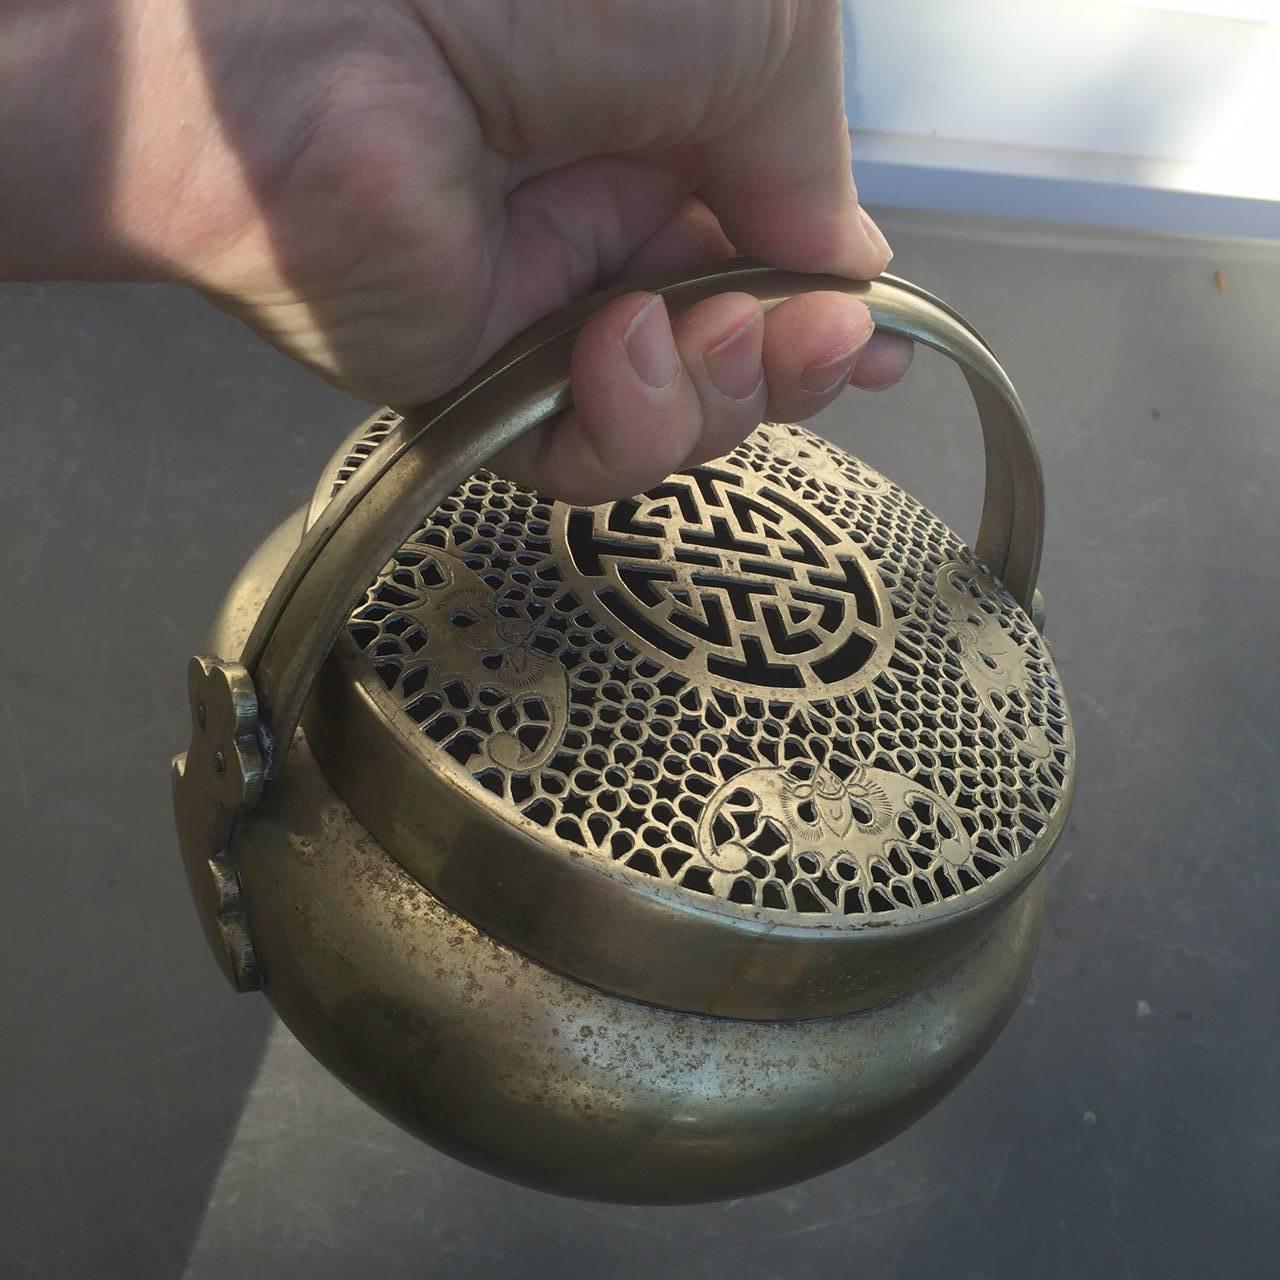 Chinese China Antique Metal Hand Warmer and Incense Burner, 19thc  FREE SHIPPING